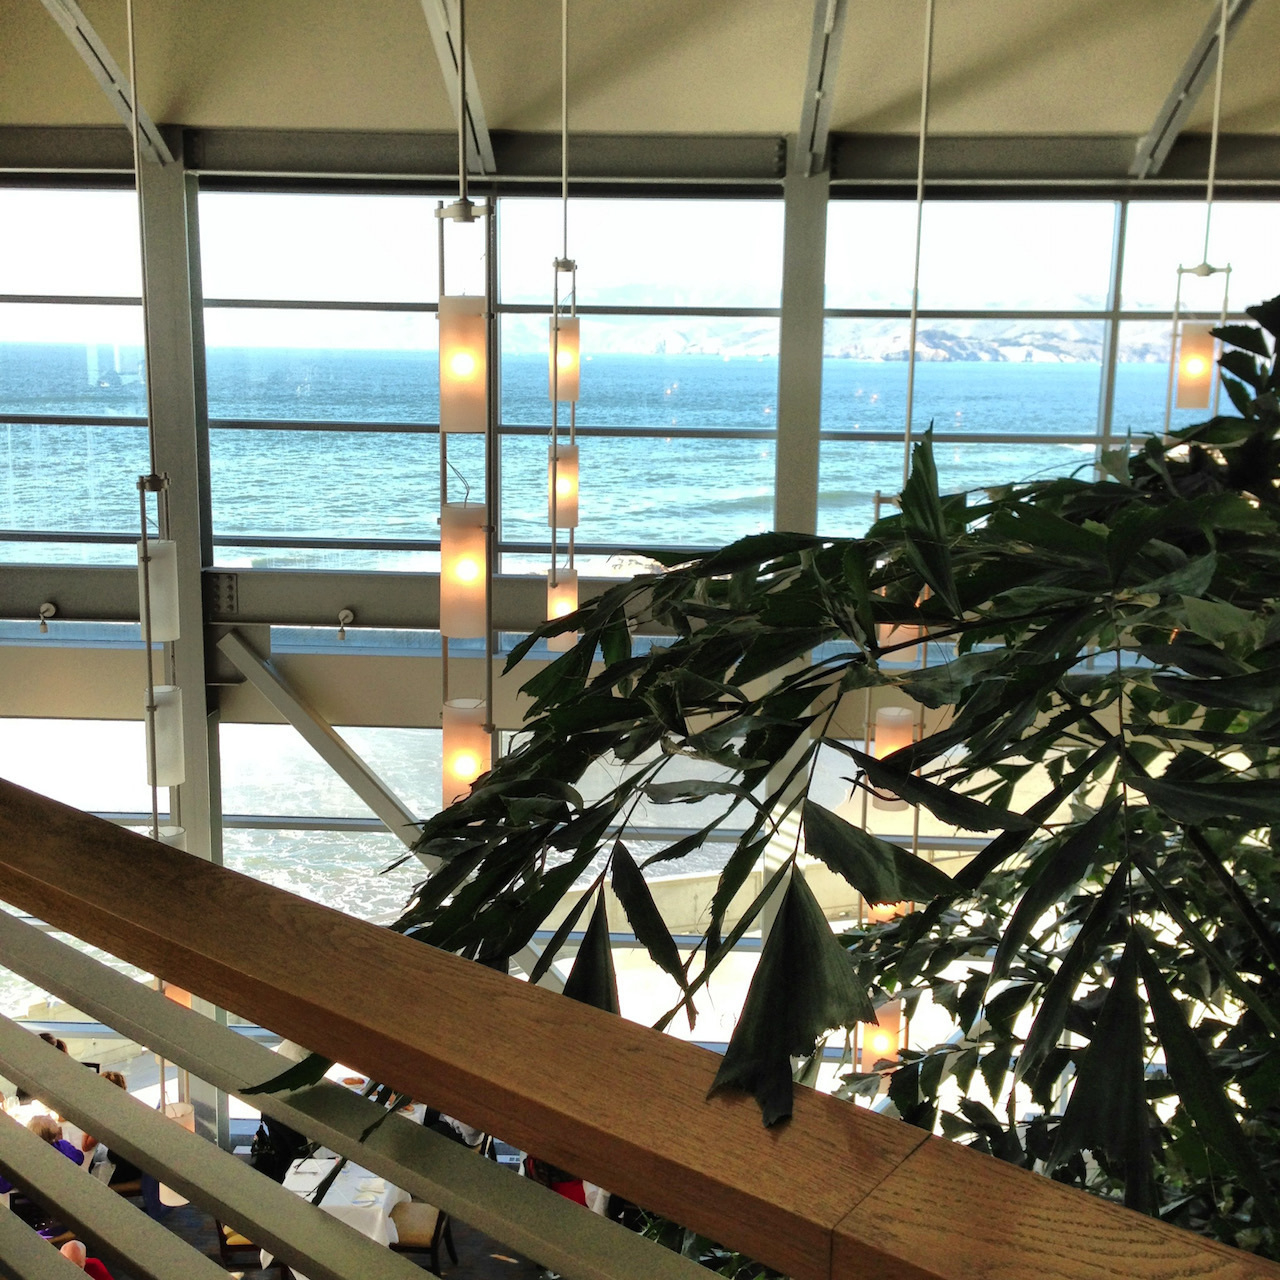 Cliff House's upper level, a bar on the balcony